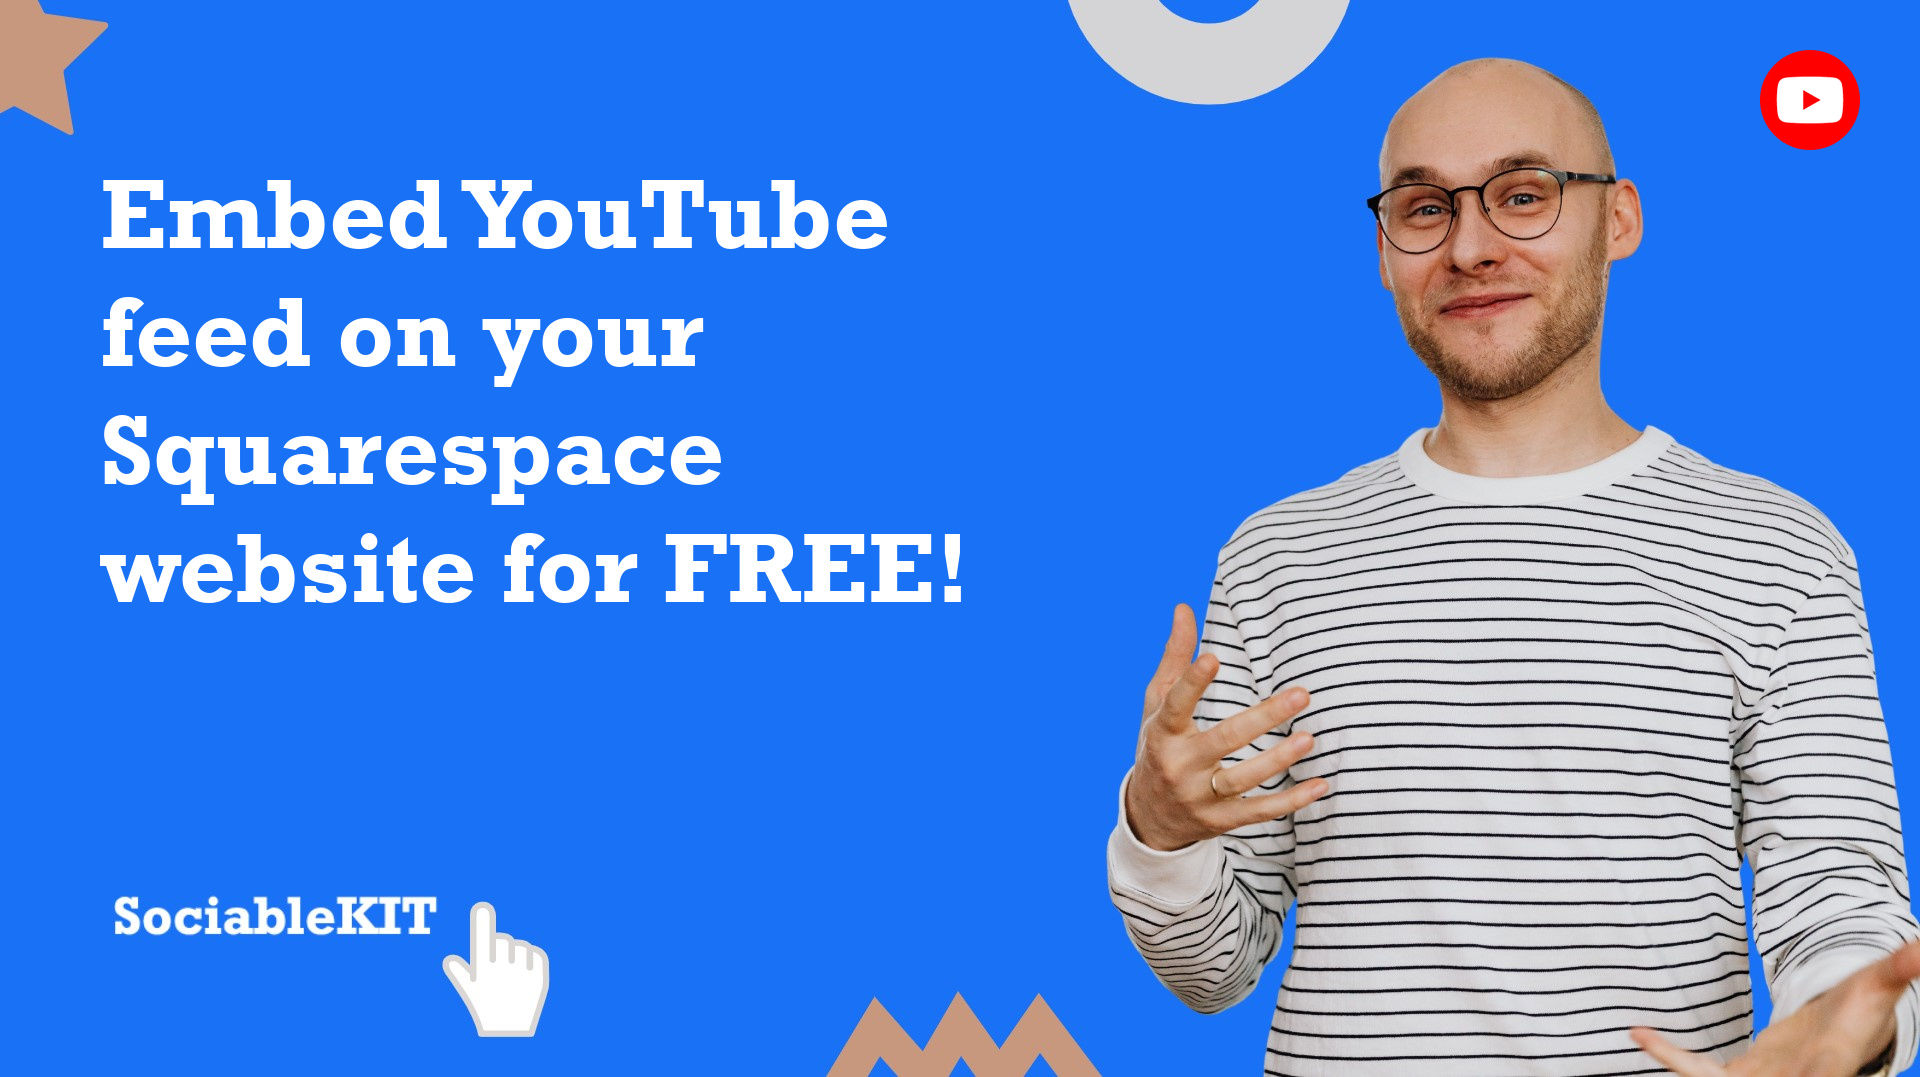 How to embed YouTube feed on your Squarespace website for FREE?